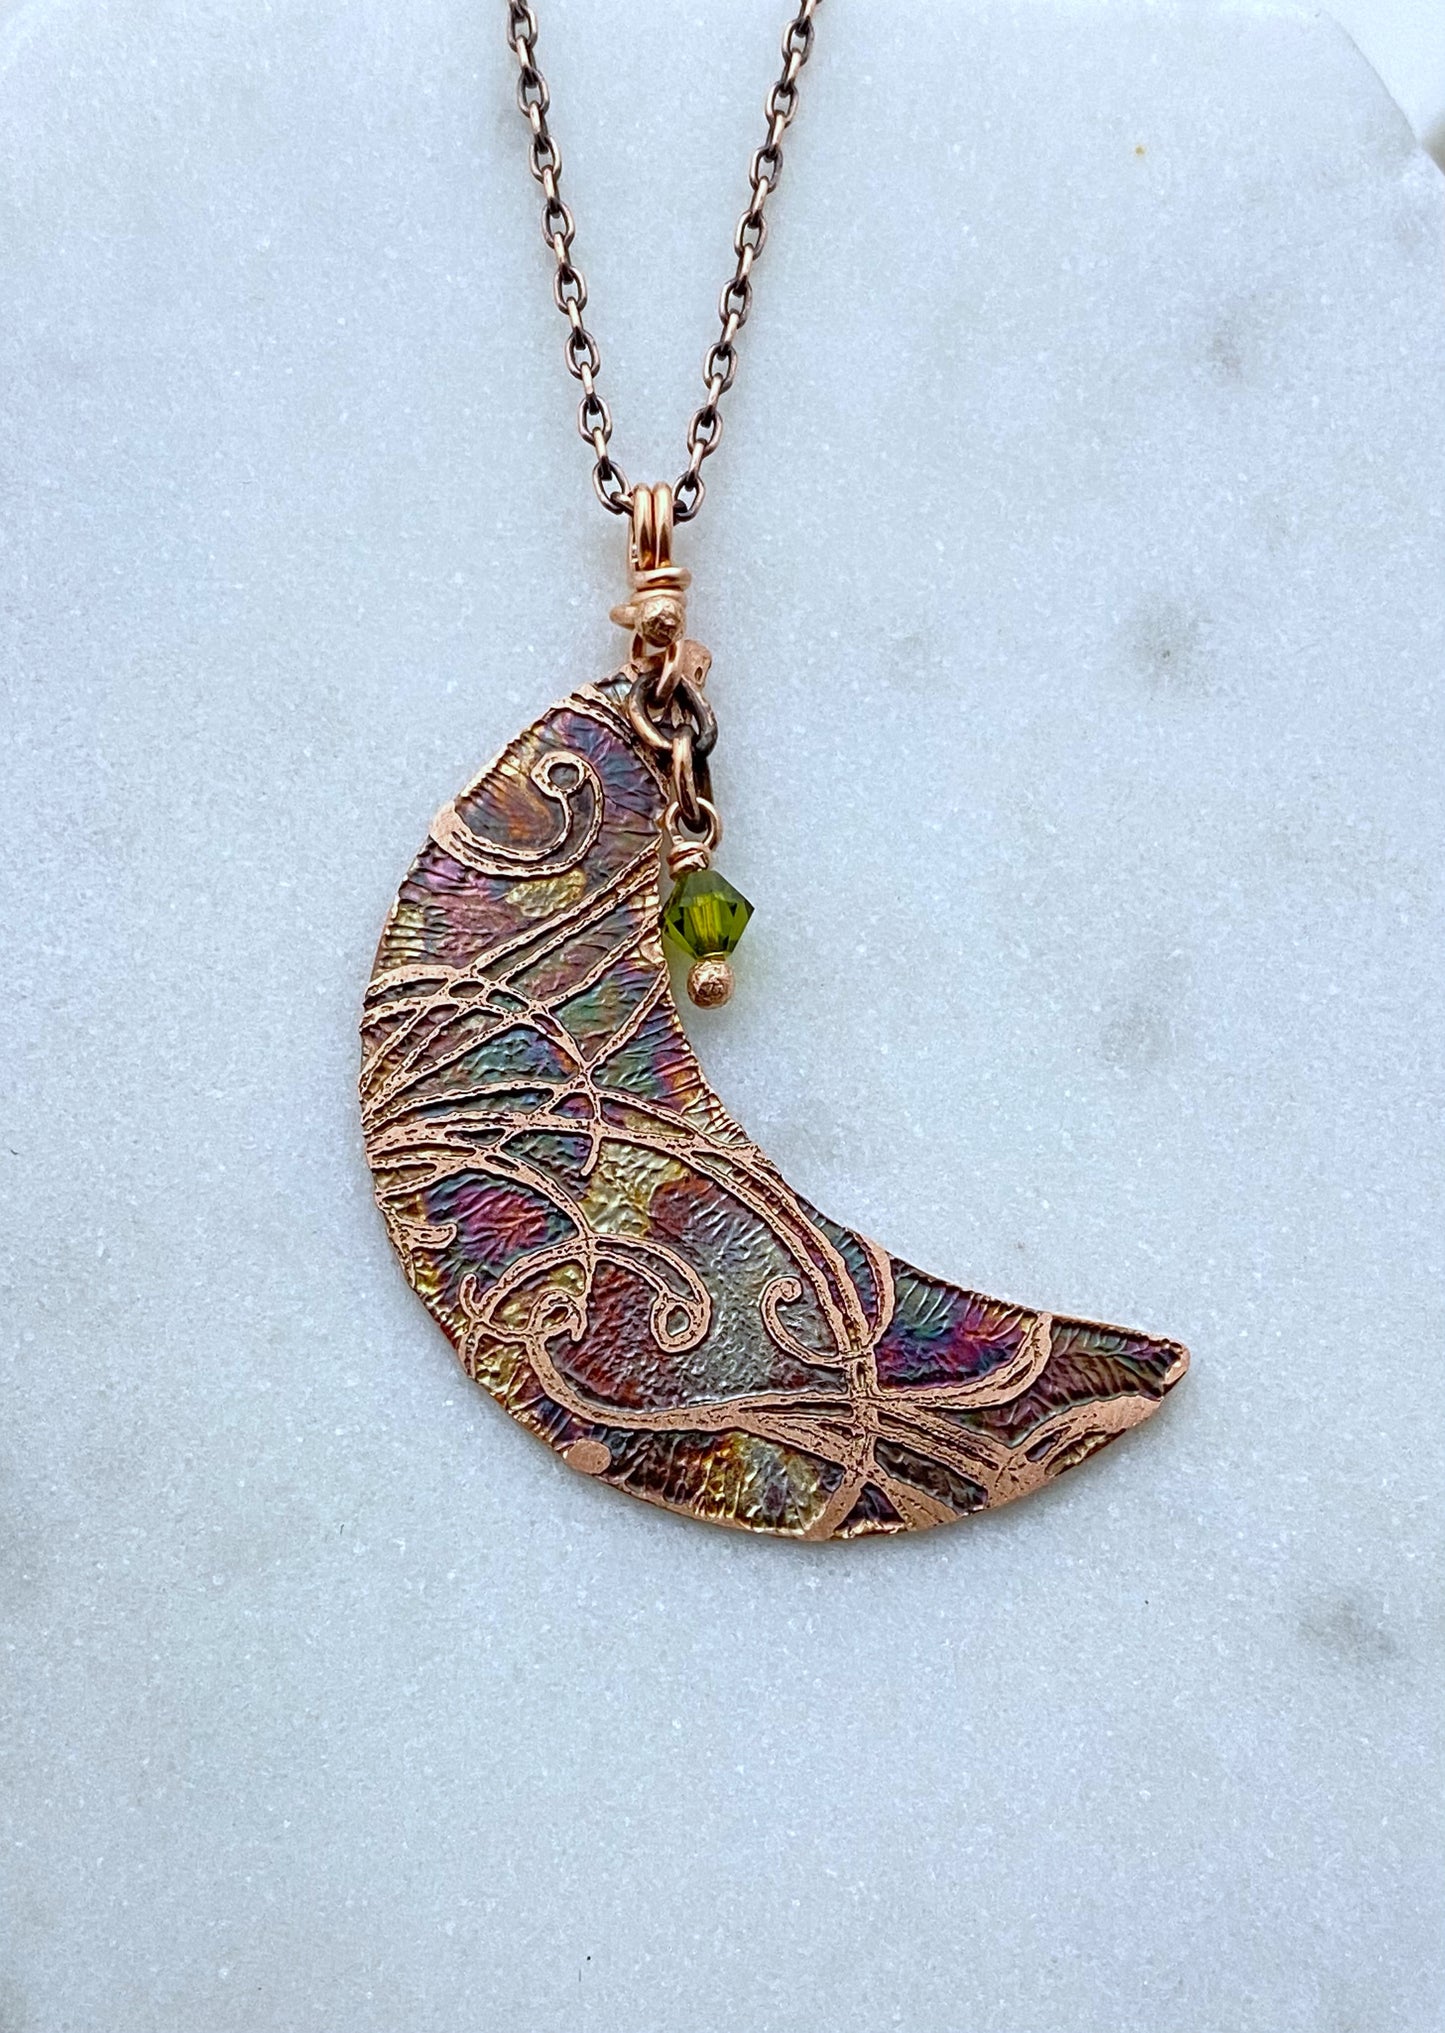 Crescent moon acid etched copper necklace with a olivine gemstone